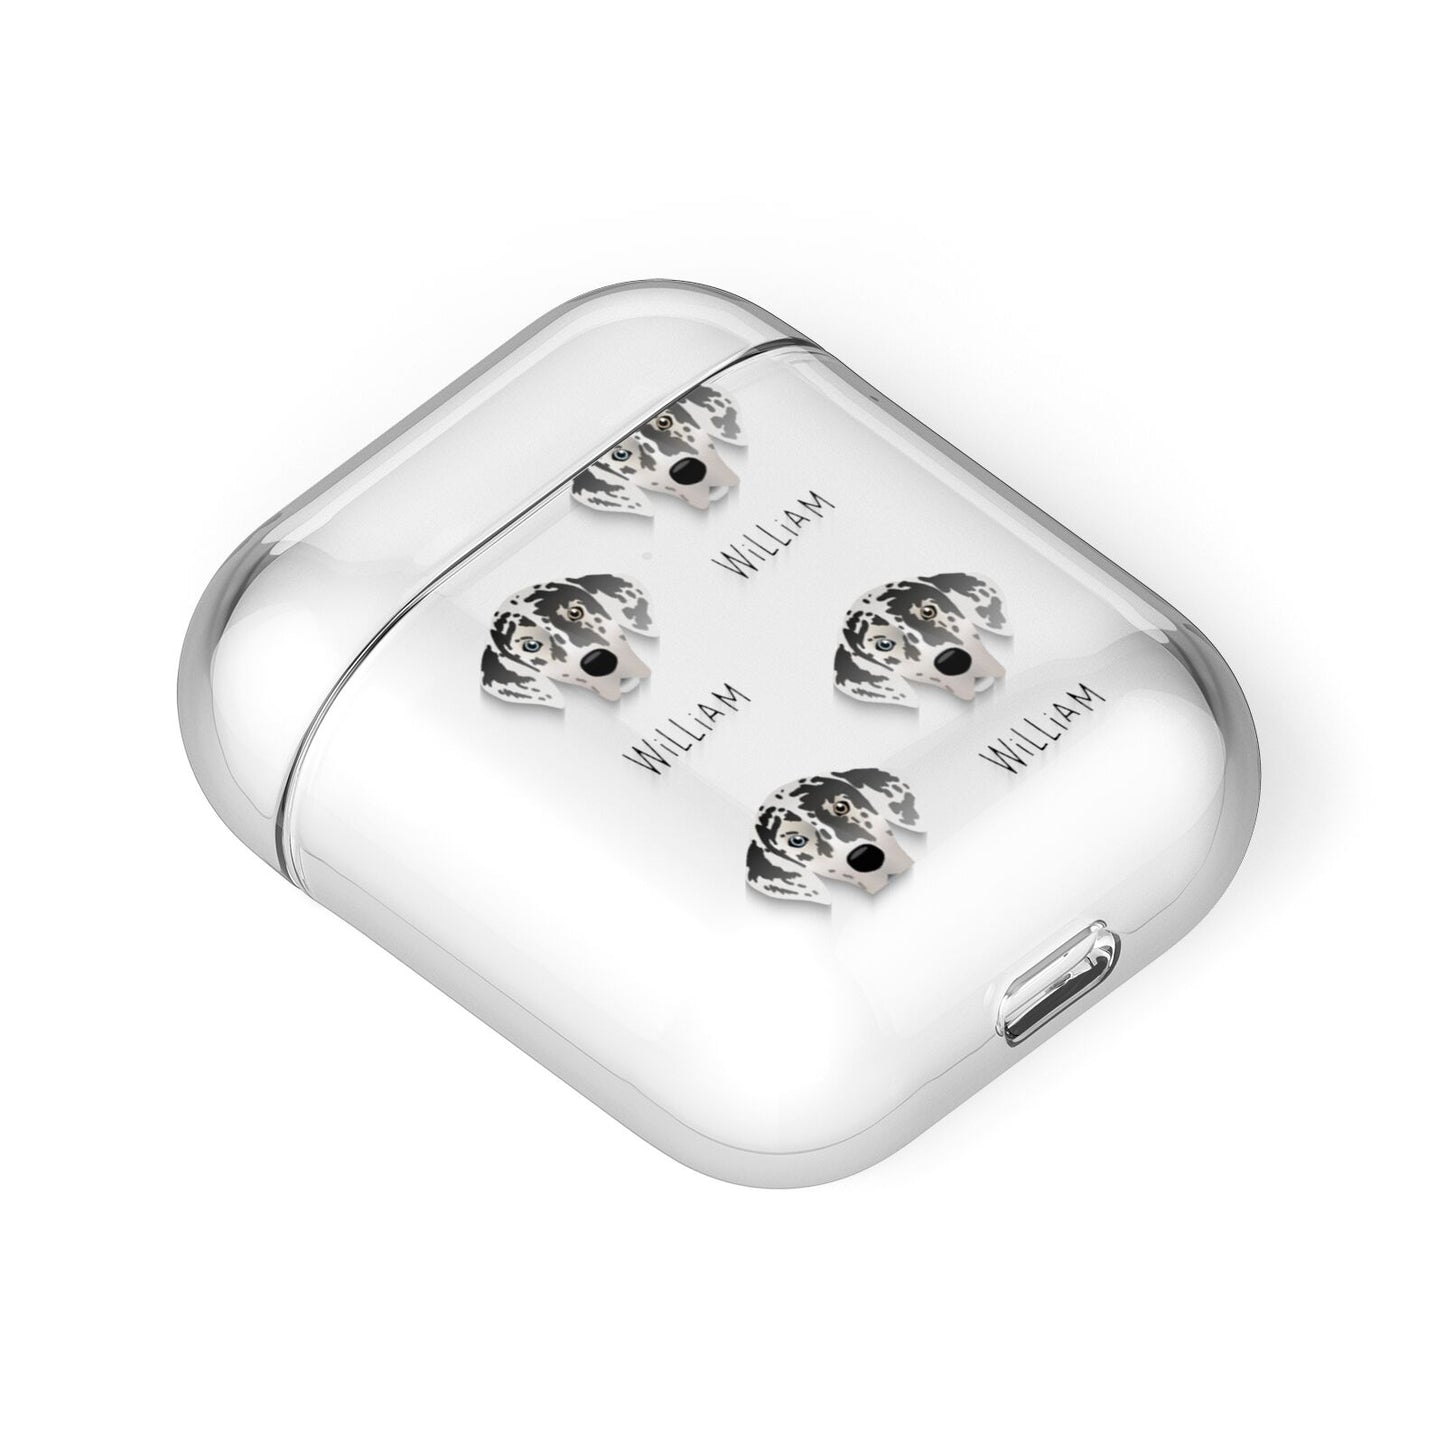 American Leopard Hound Icon with Name AirPods Case Laid Flat